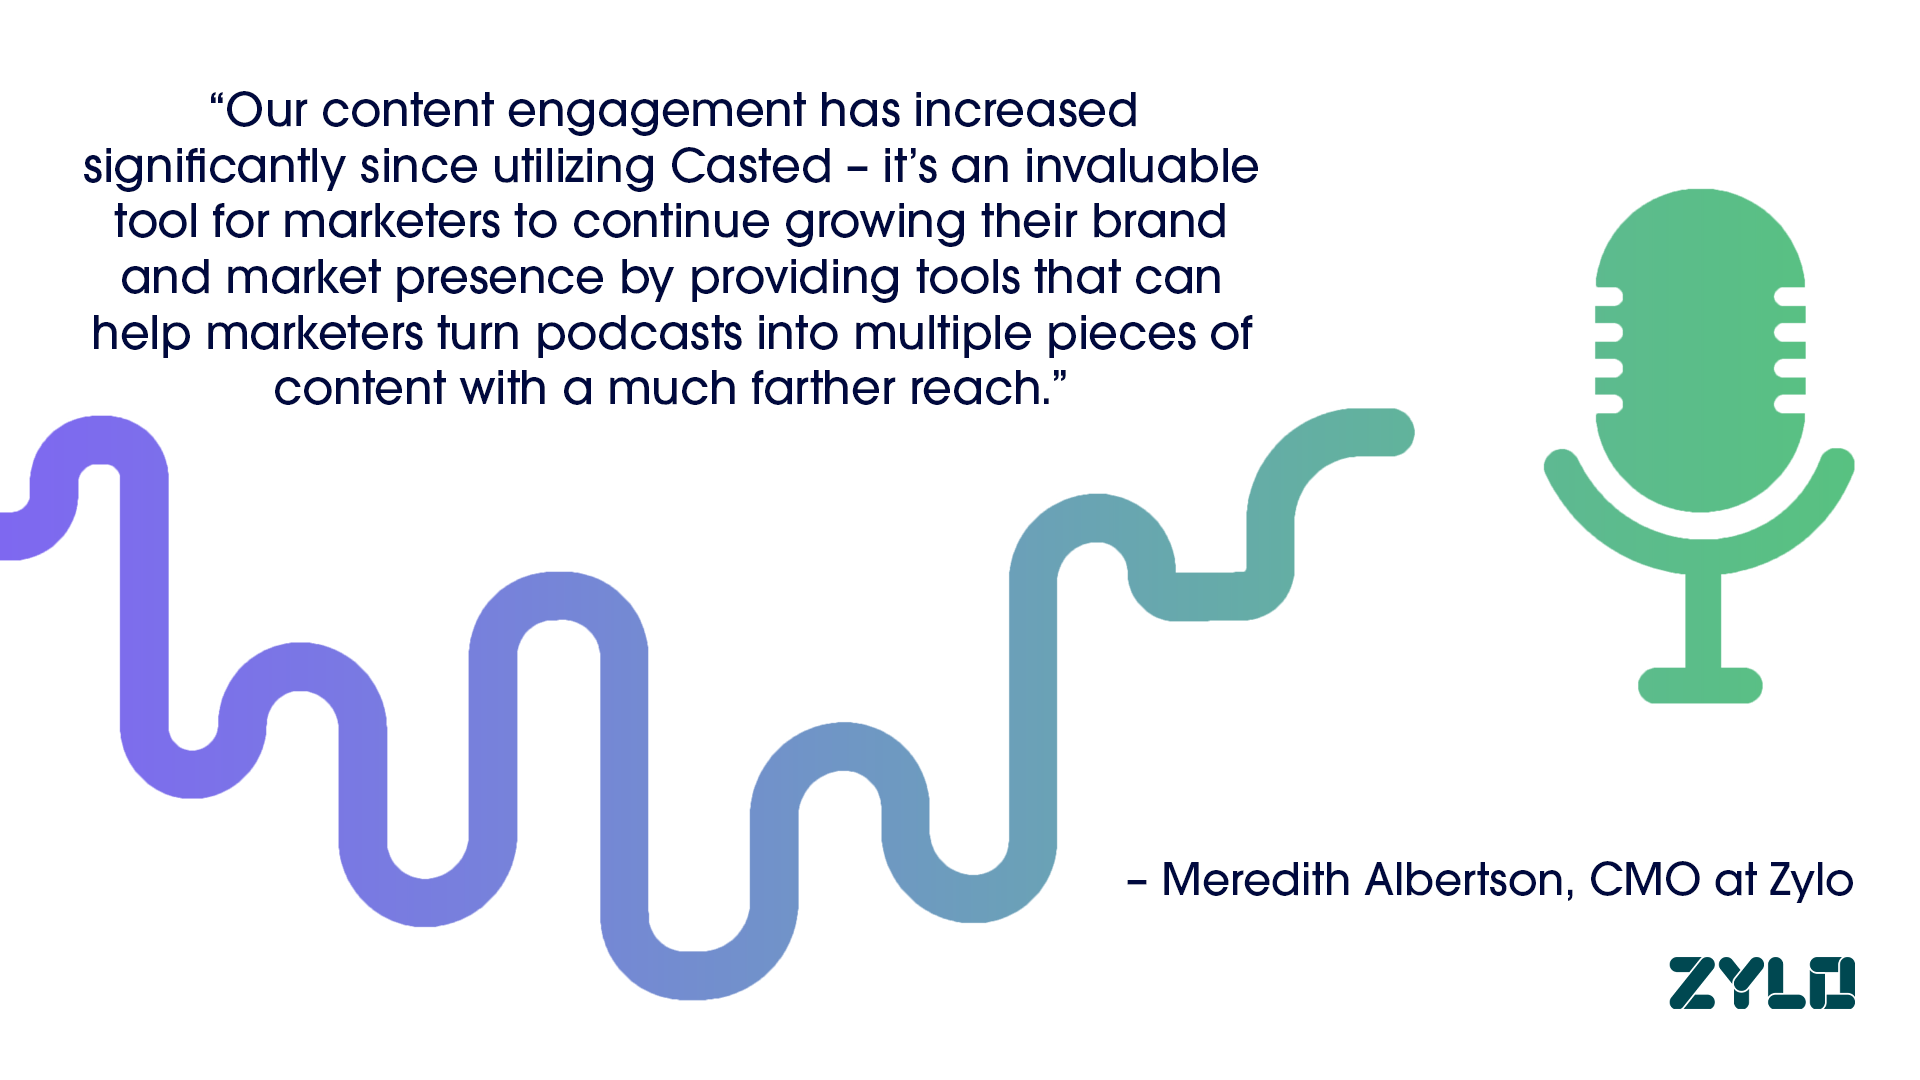 "Our content engagement has increased significantly since utilizing Casted - it's an invaluable tool for marketers to continue growing their brand and market presence by providing tools that can help marketers turn podcasts into multiple pieces of content with a much farther reach" - Meredeth Albertson, CMO at Zylo